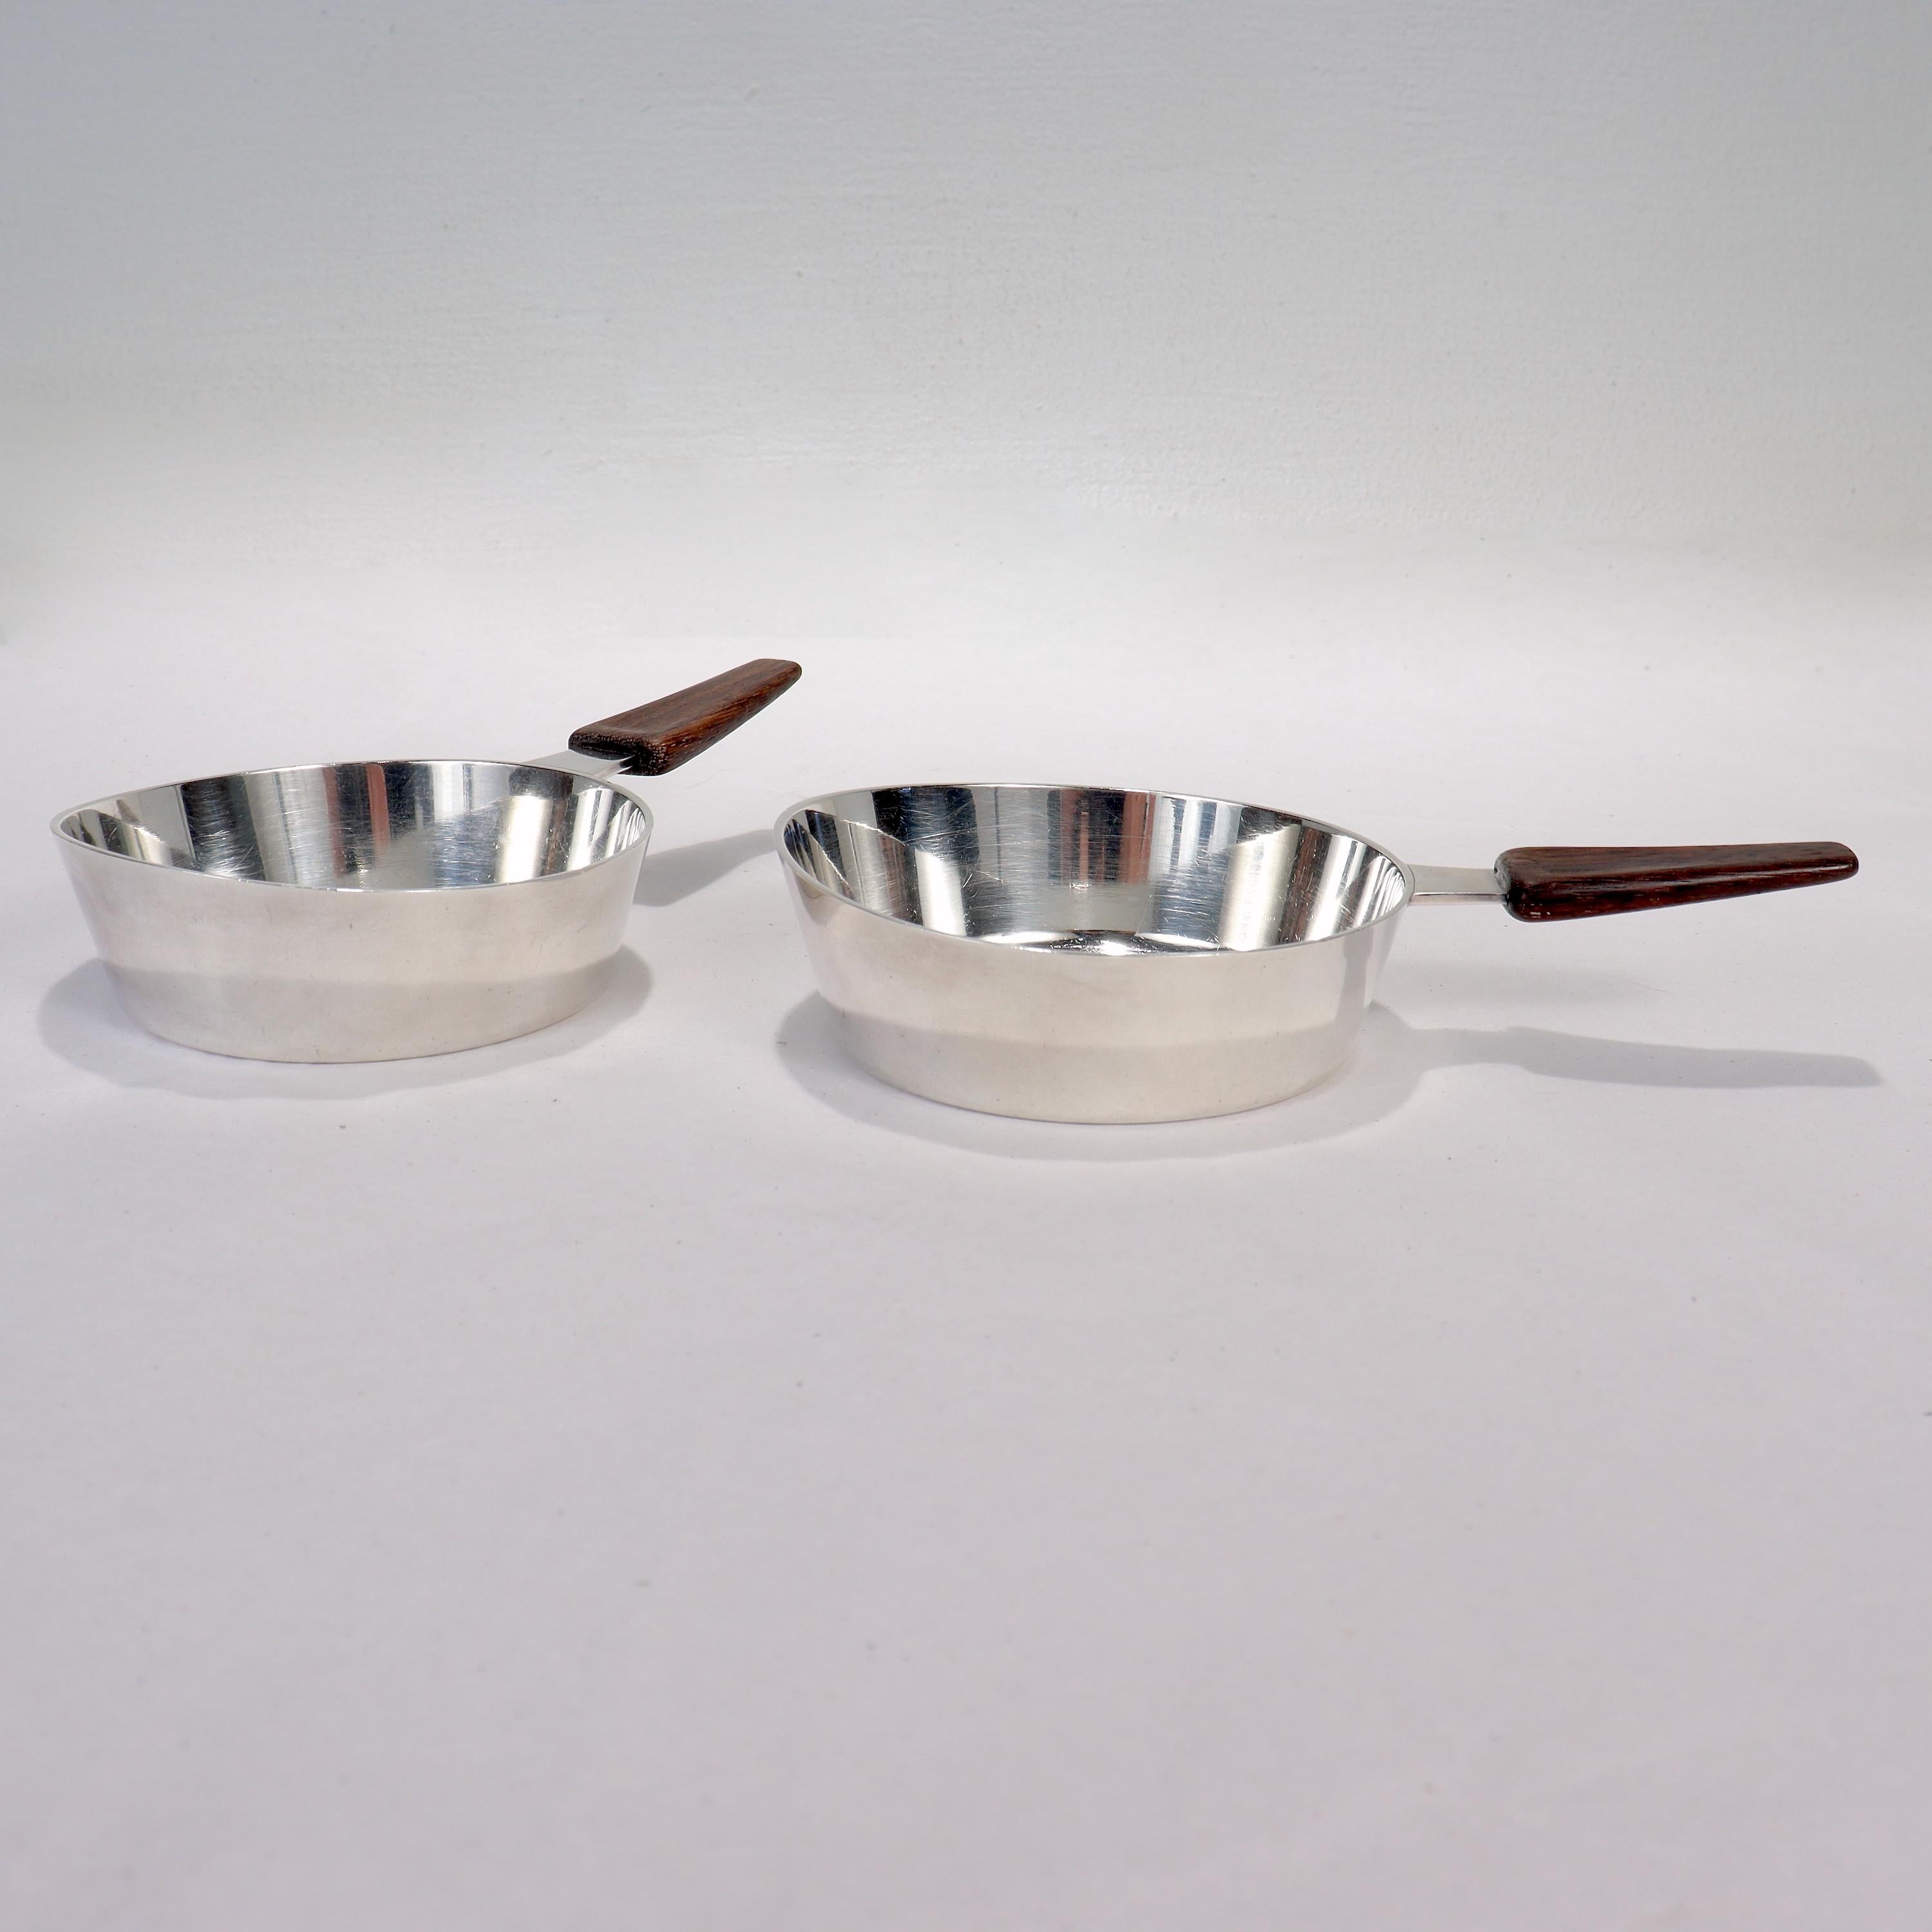 A fine pair of Mid-Century Modern sterling silver and wooden handled dishes.

Possibly designed as raclette dishes, the pieces resemble small pans. Perfect nowadays for as bowls for a Modernist cocktail tray or service.

The attached wooden handles